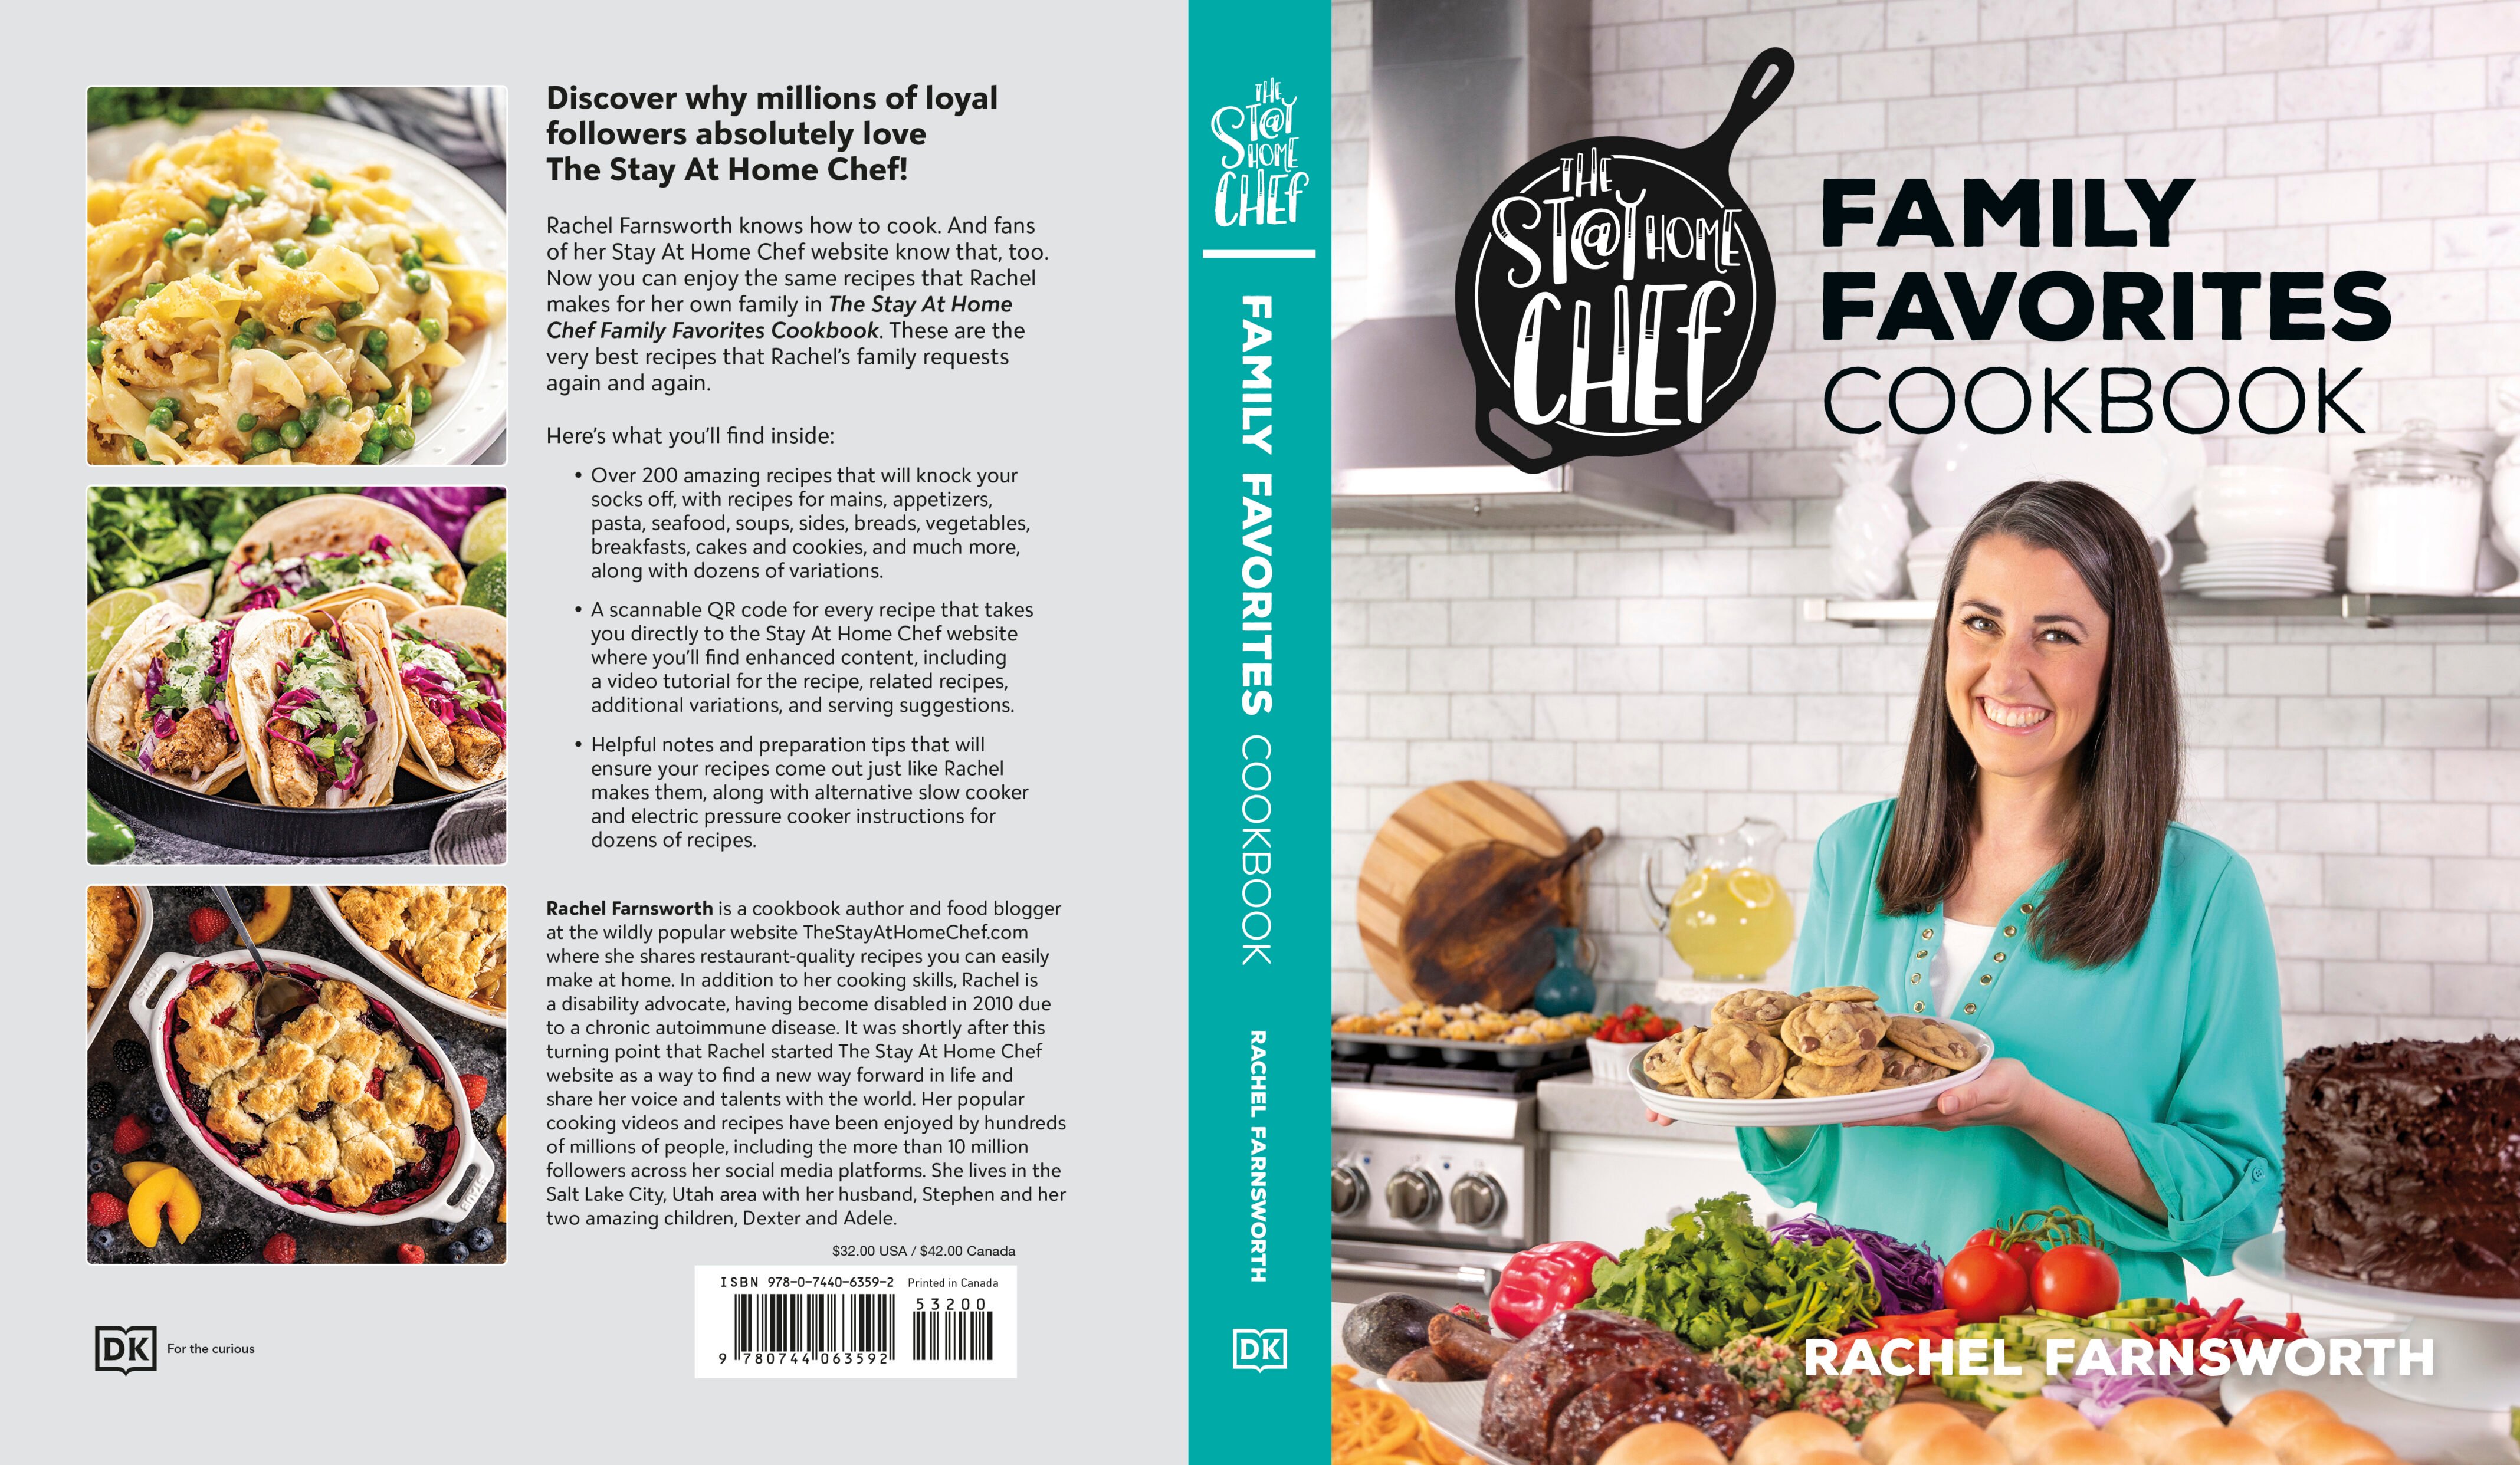 Cookbook cover and back cover for The Stay At Home Chef Family Favorites Cookbook featuring Rachel holding a plate of chocolate chip cookies surrounded by other prepared recipes from the book.